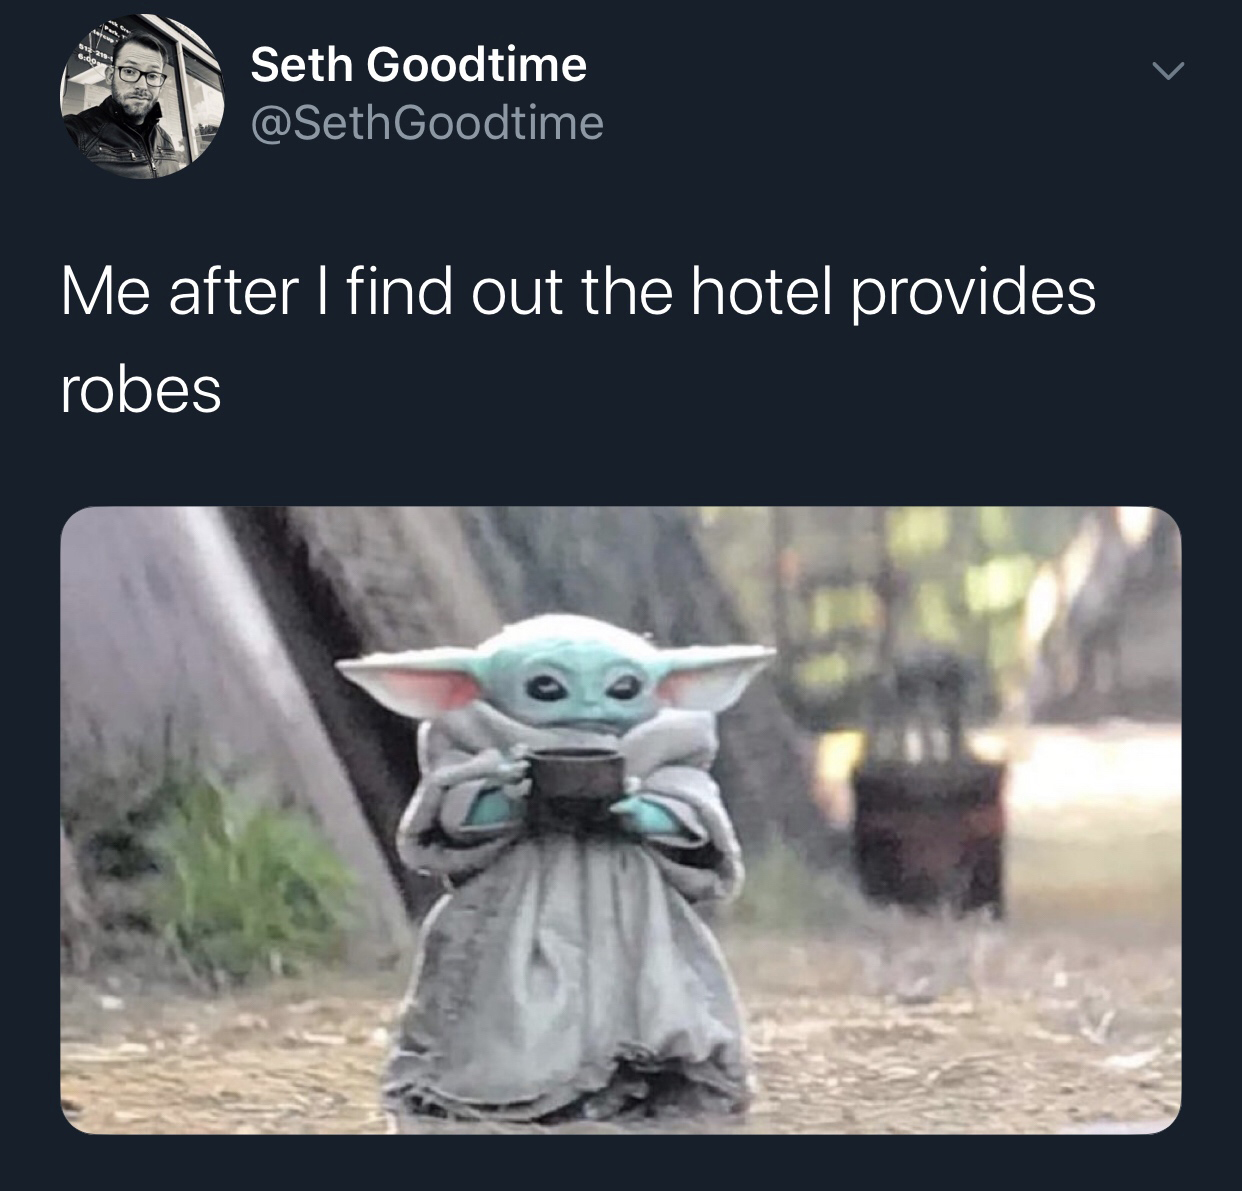 photo caption - 32 6.00 Seth Goodtime Goodtime Me after I find out the hotel provides robes